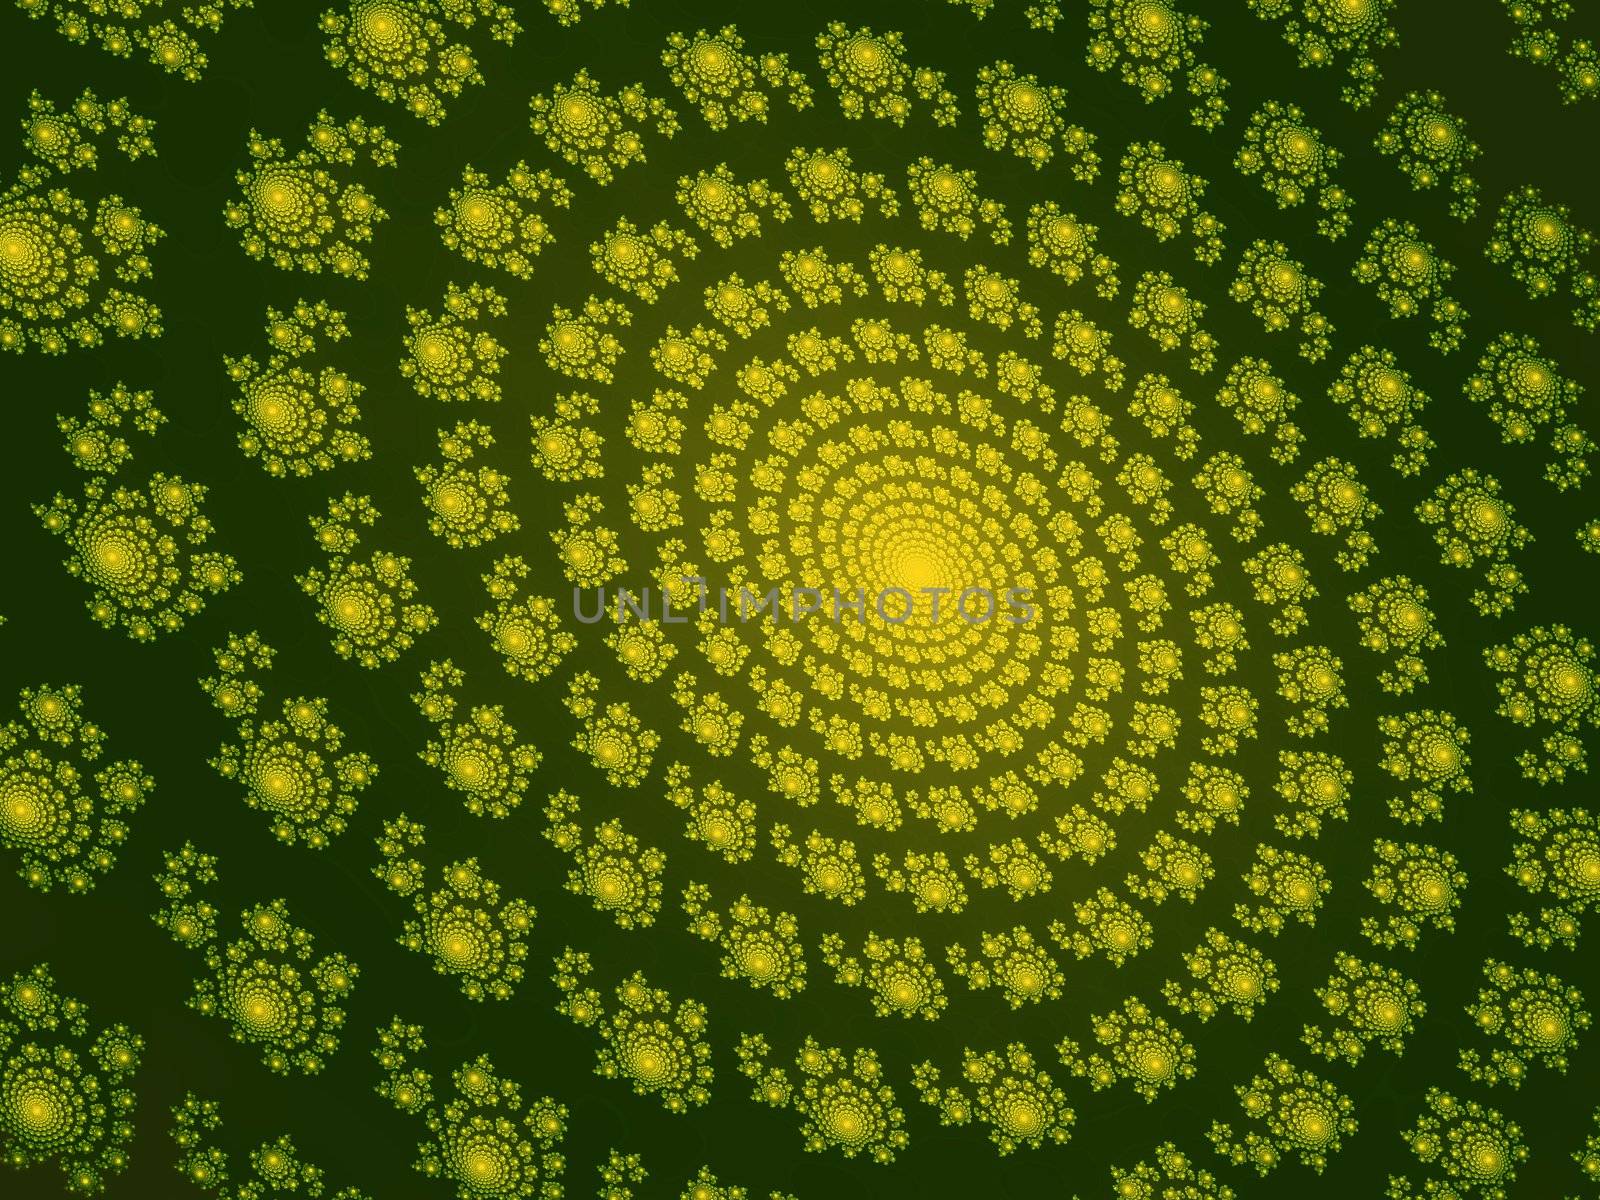 The harmonious image invented fractal spirals of yellow colour.
